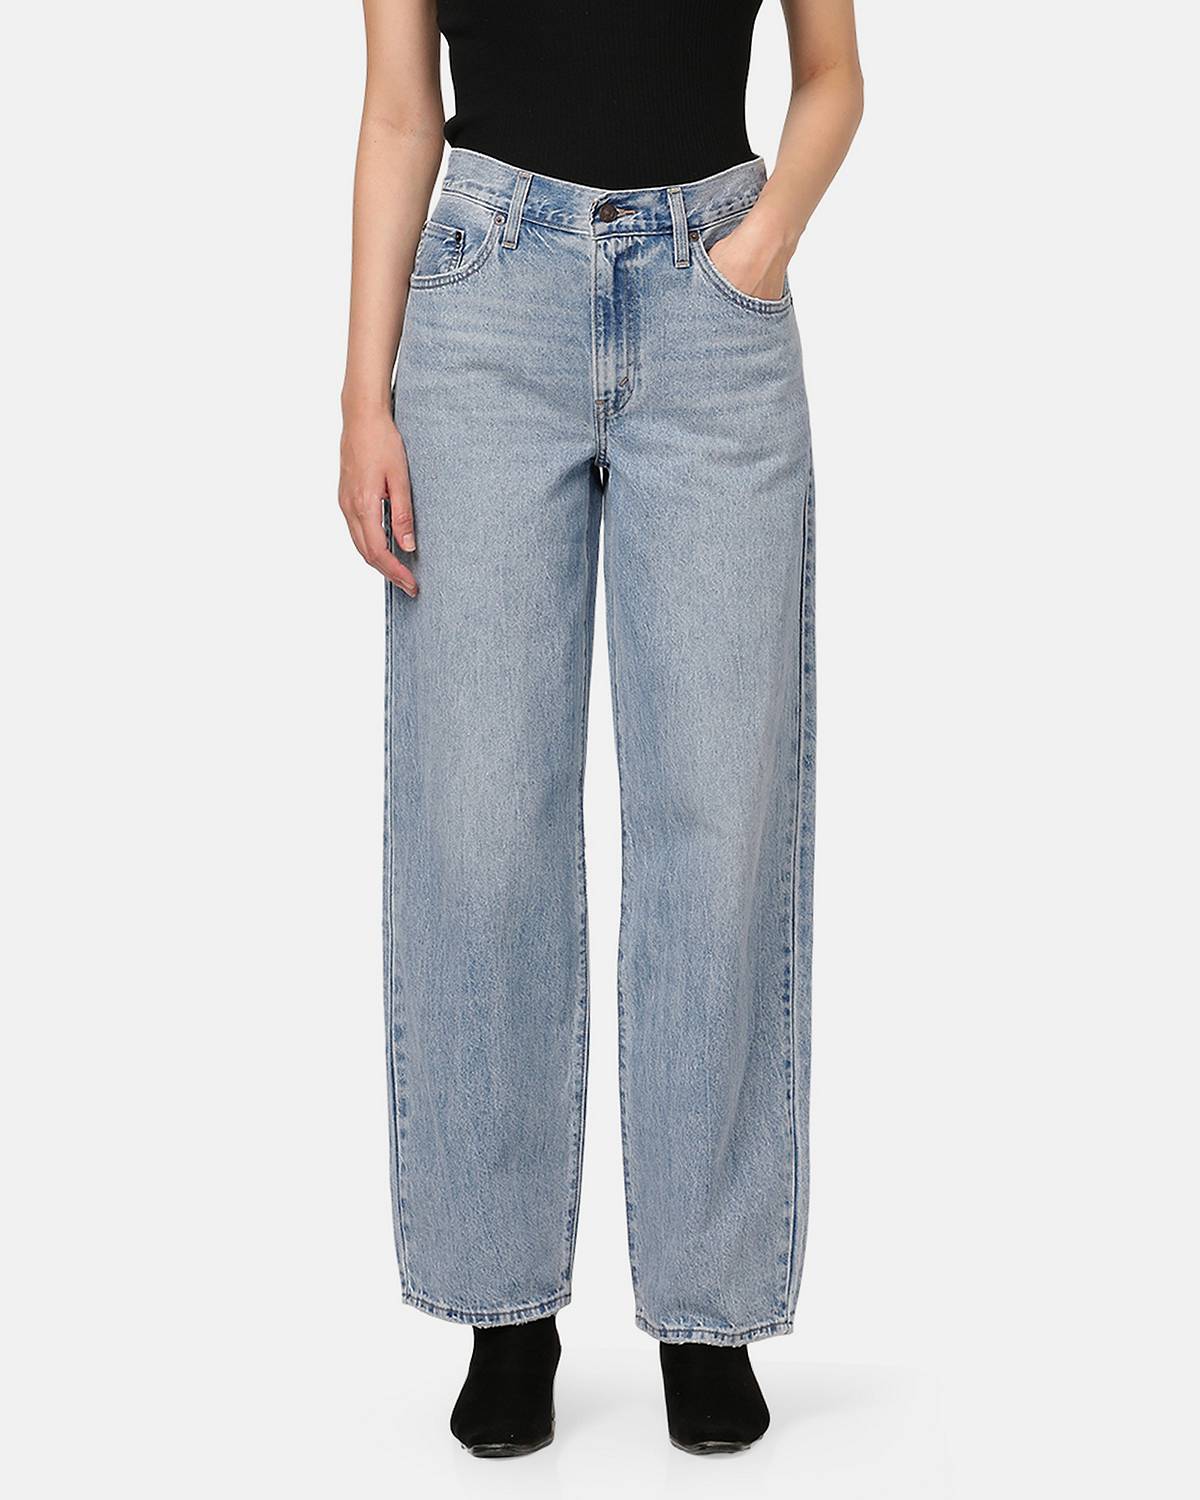 Women's High Waisted Jeans - Shop High Rise Jeans for Women